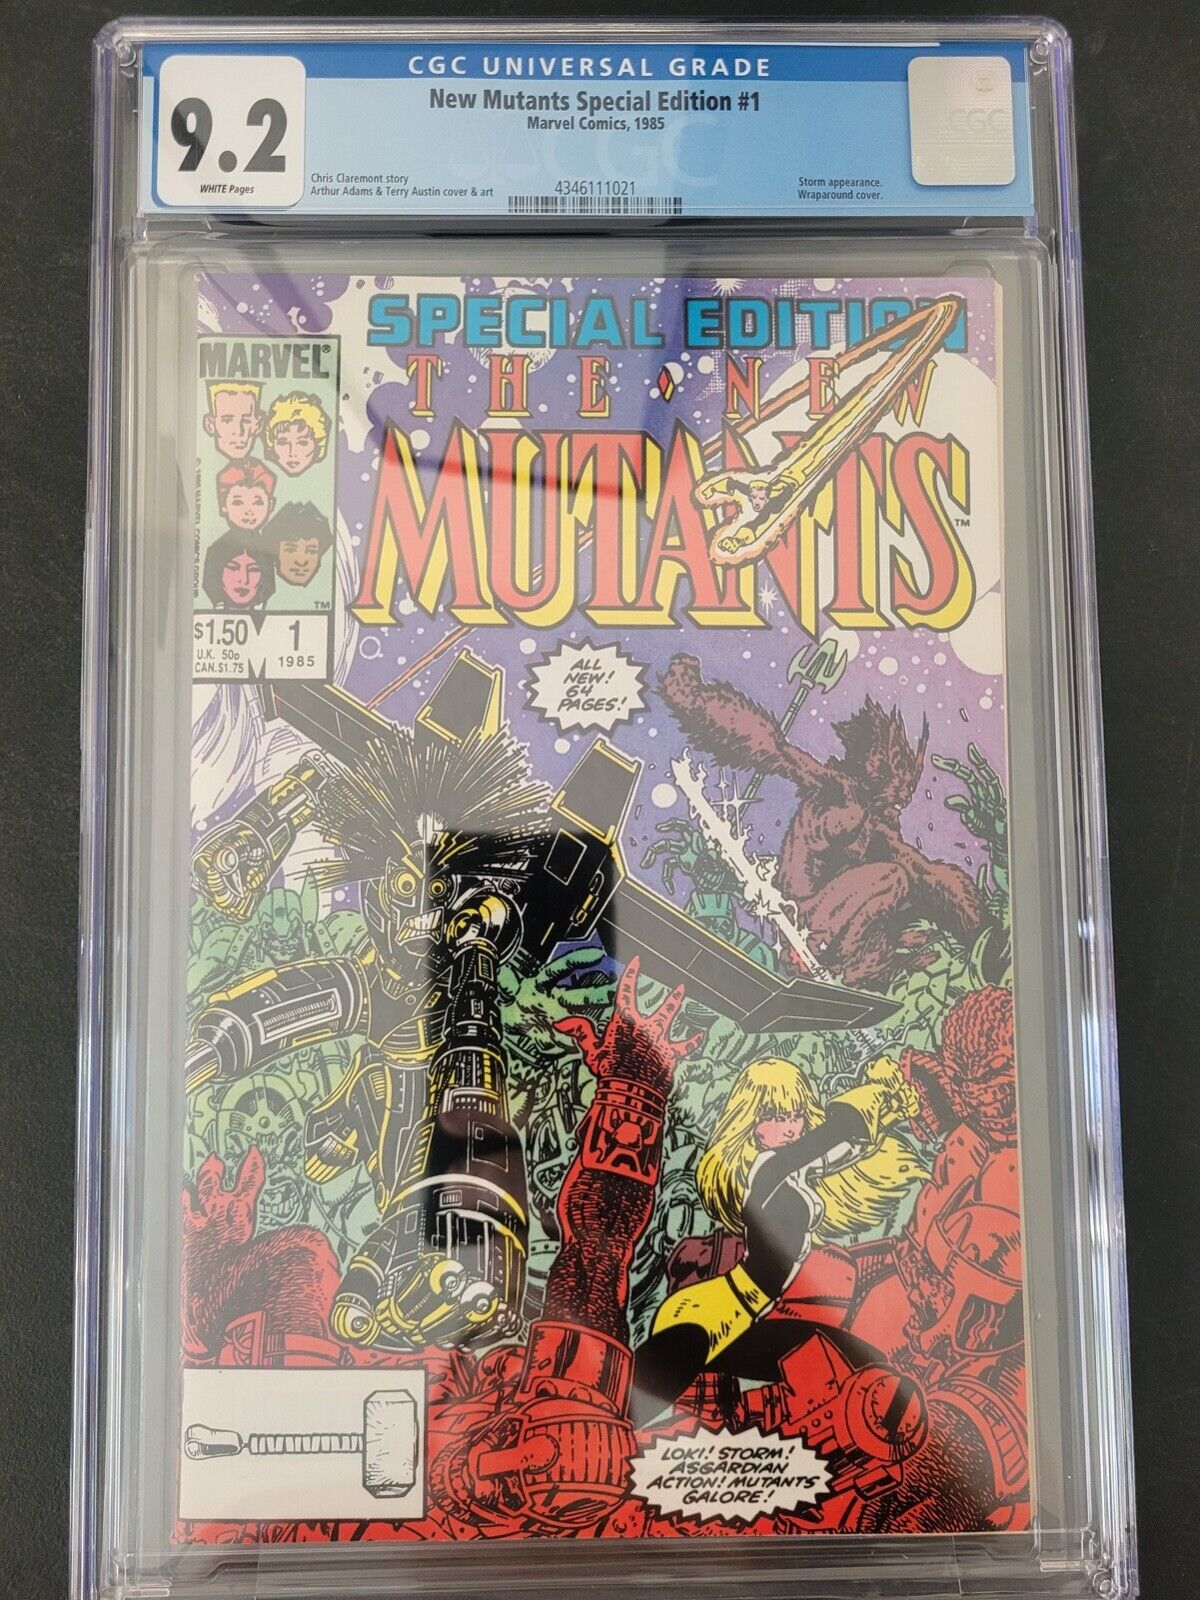 THE NEW MUTANTS SPECIAL EDITION #1 CGC 9.2 GRADED 1985 AMAZING ART ADAMS COVER